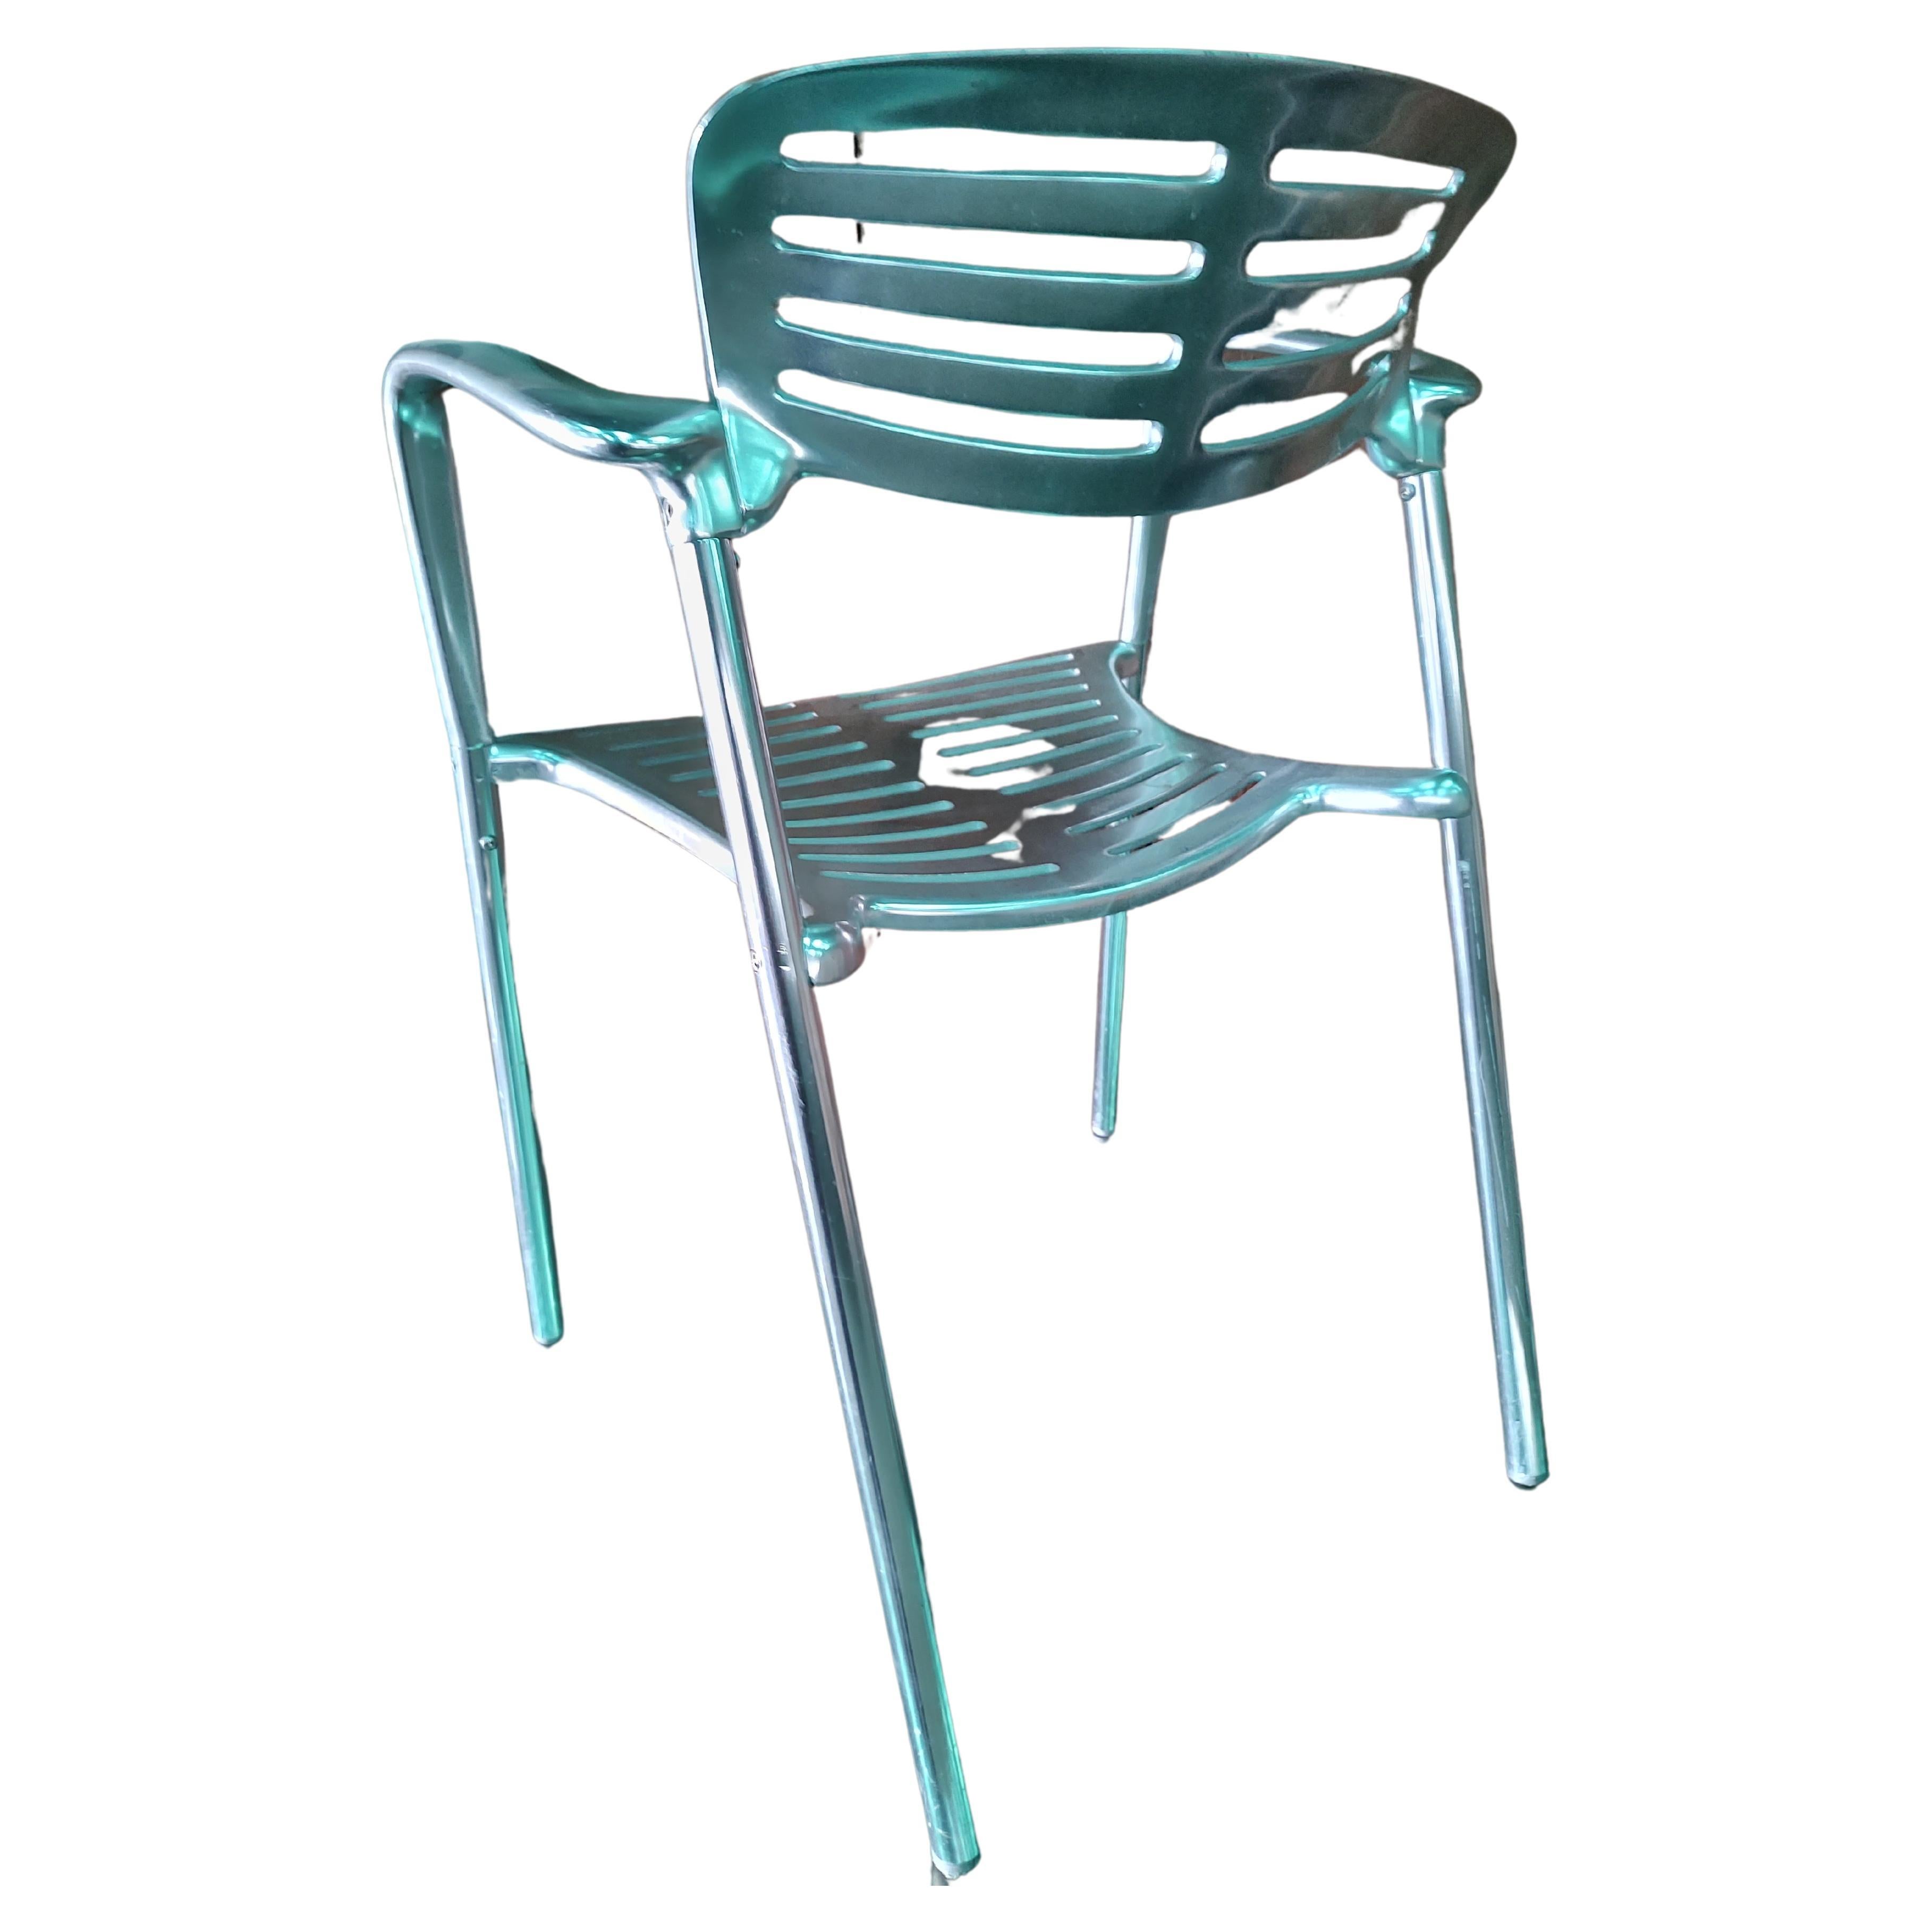 Fabulous simple yet elegant design by Jorge Pensi for Amat. Top quality cast aluminum elements which are fitted to each other. In excellent vintage condition with minimal wear. Scratches to finish, nothing deep. Chairs stack and were used in a cafe